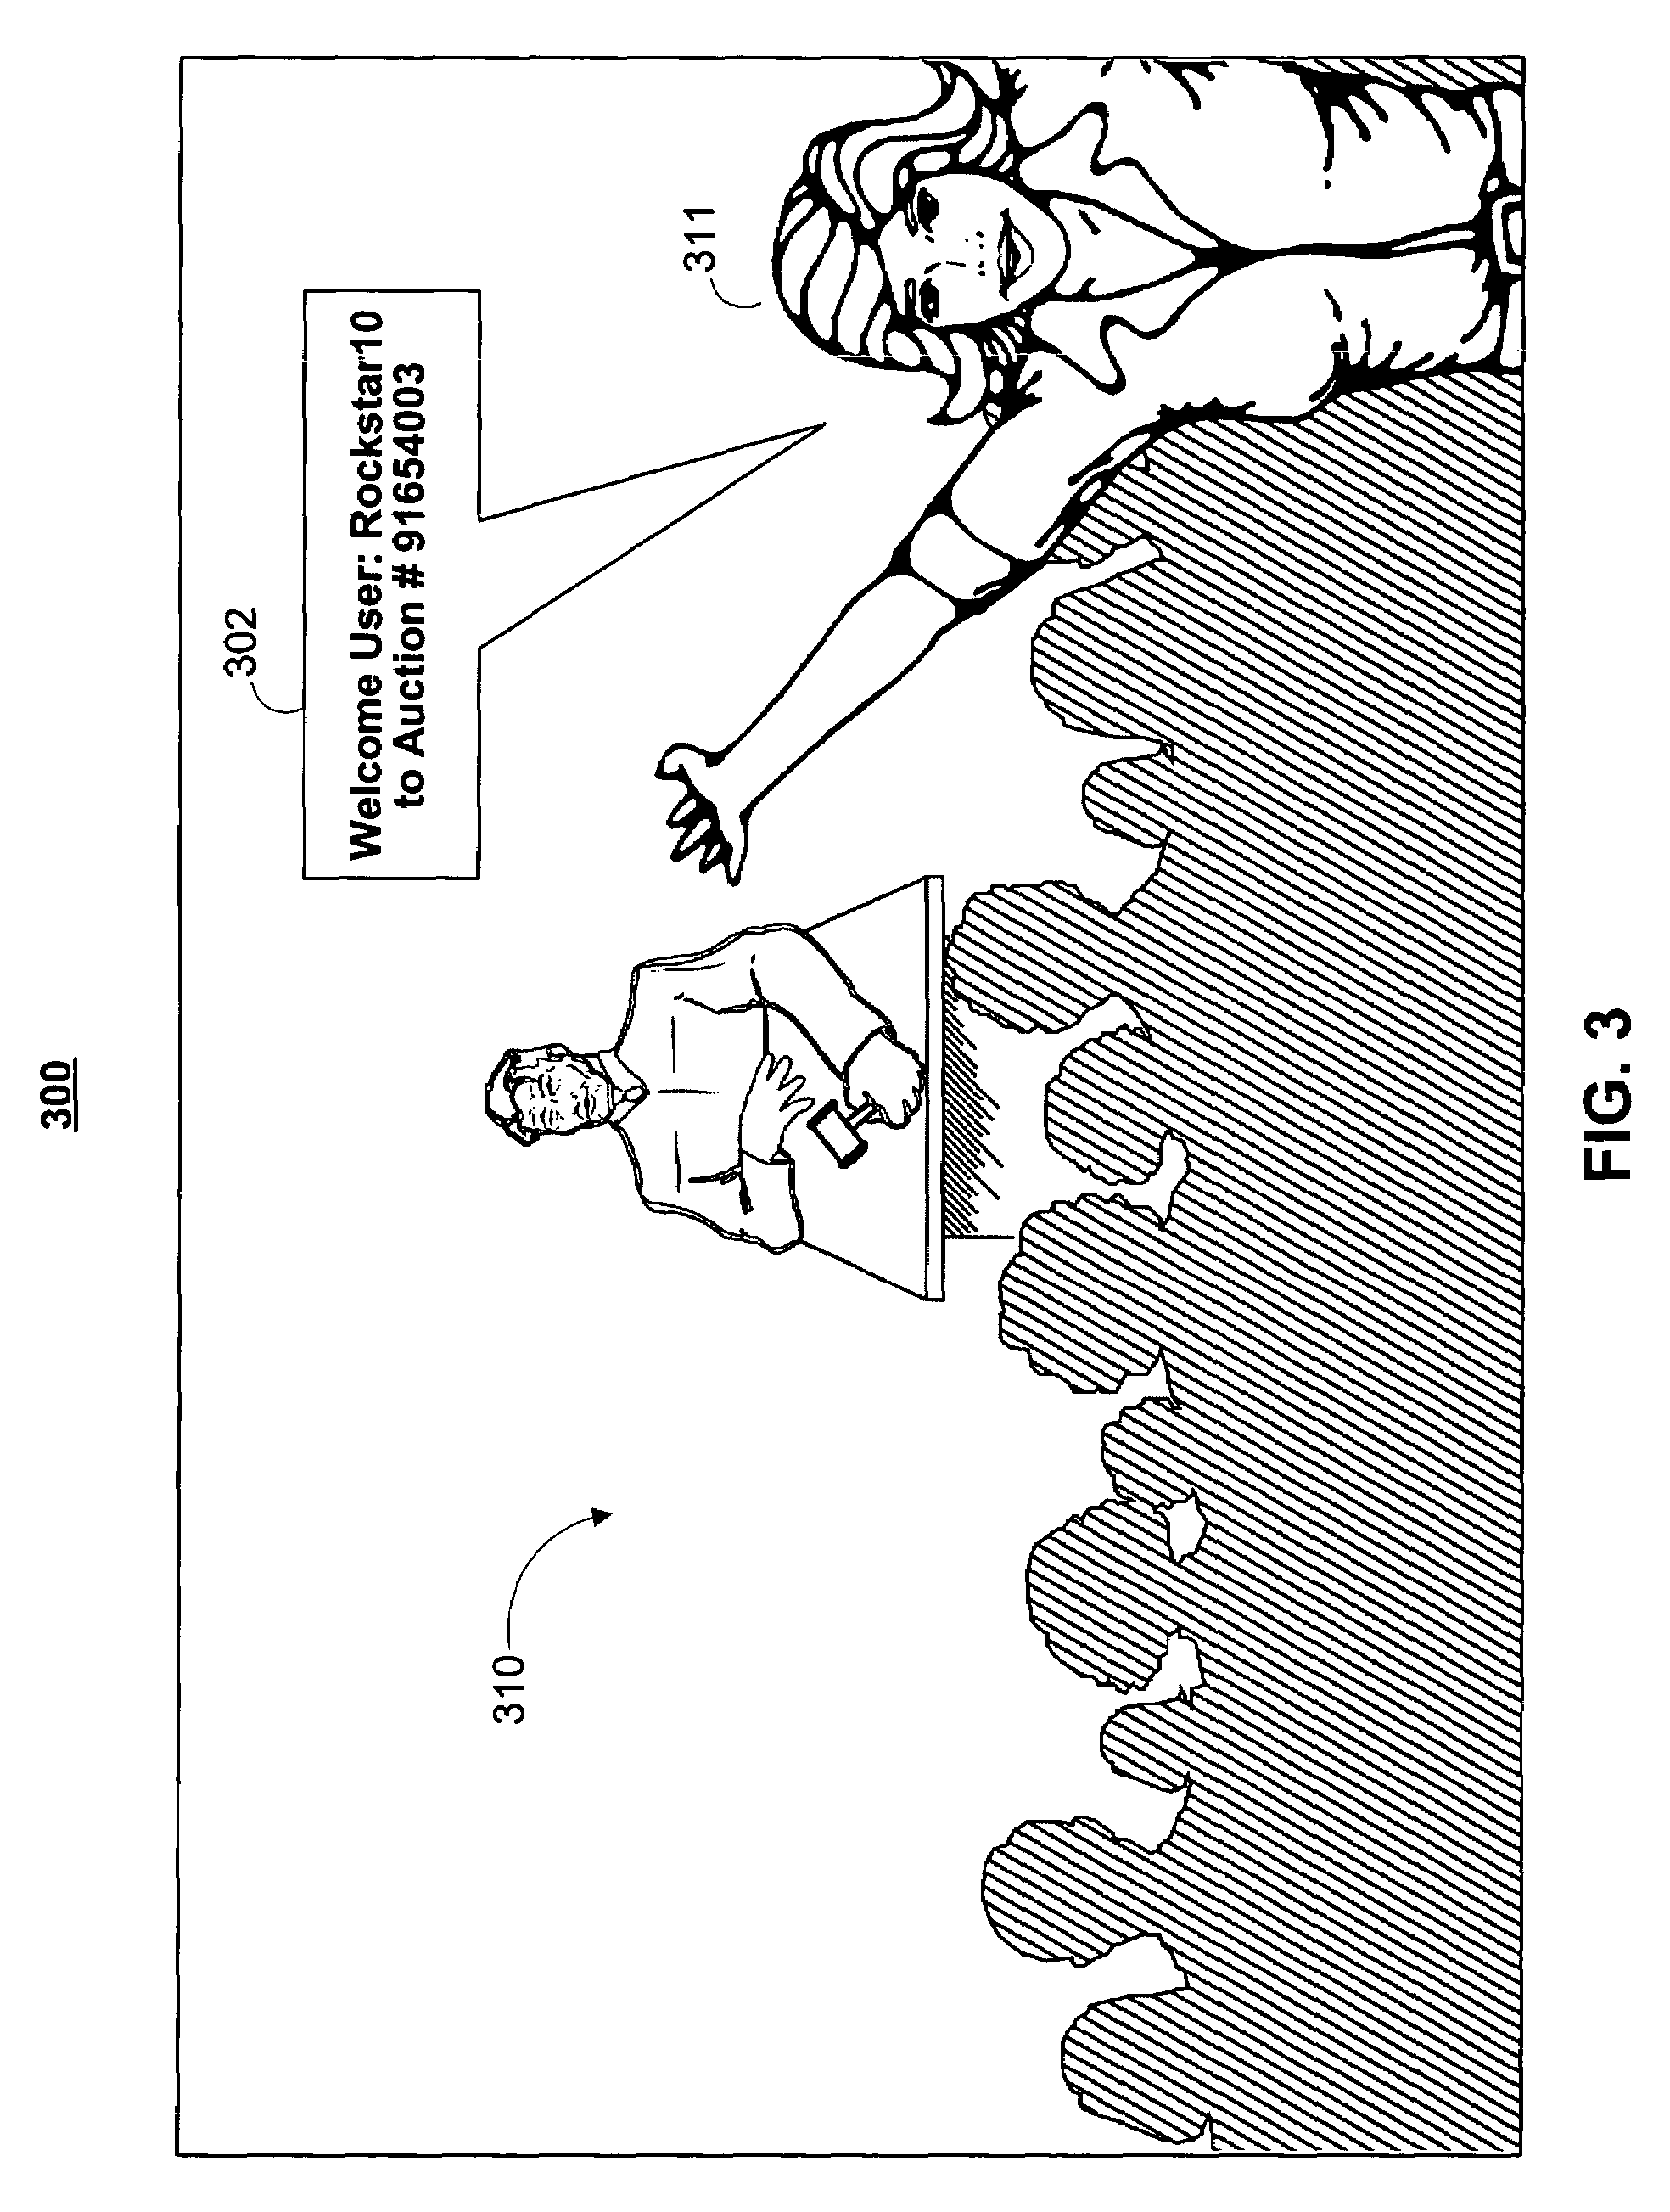 Systems and methods for automated internet-based auctions